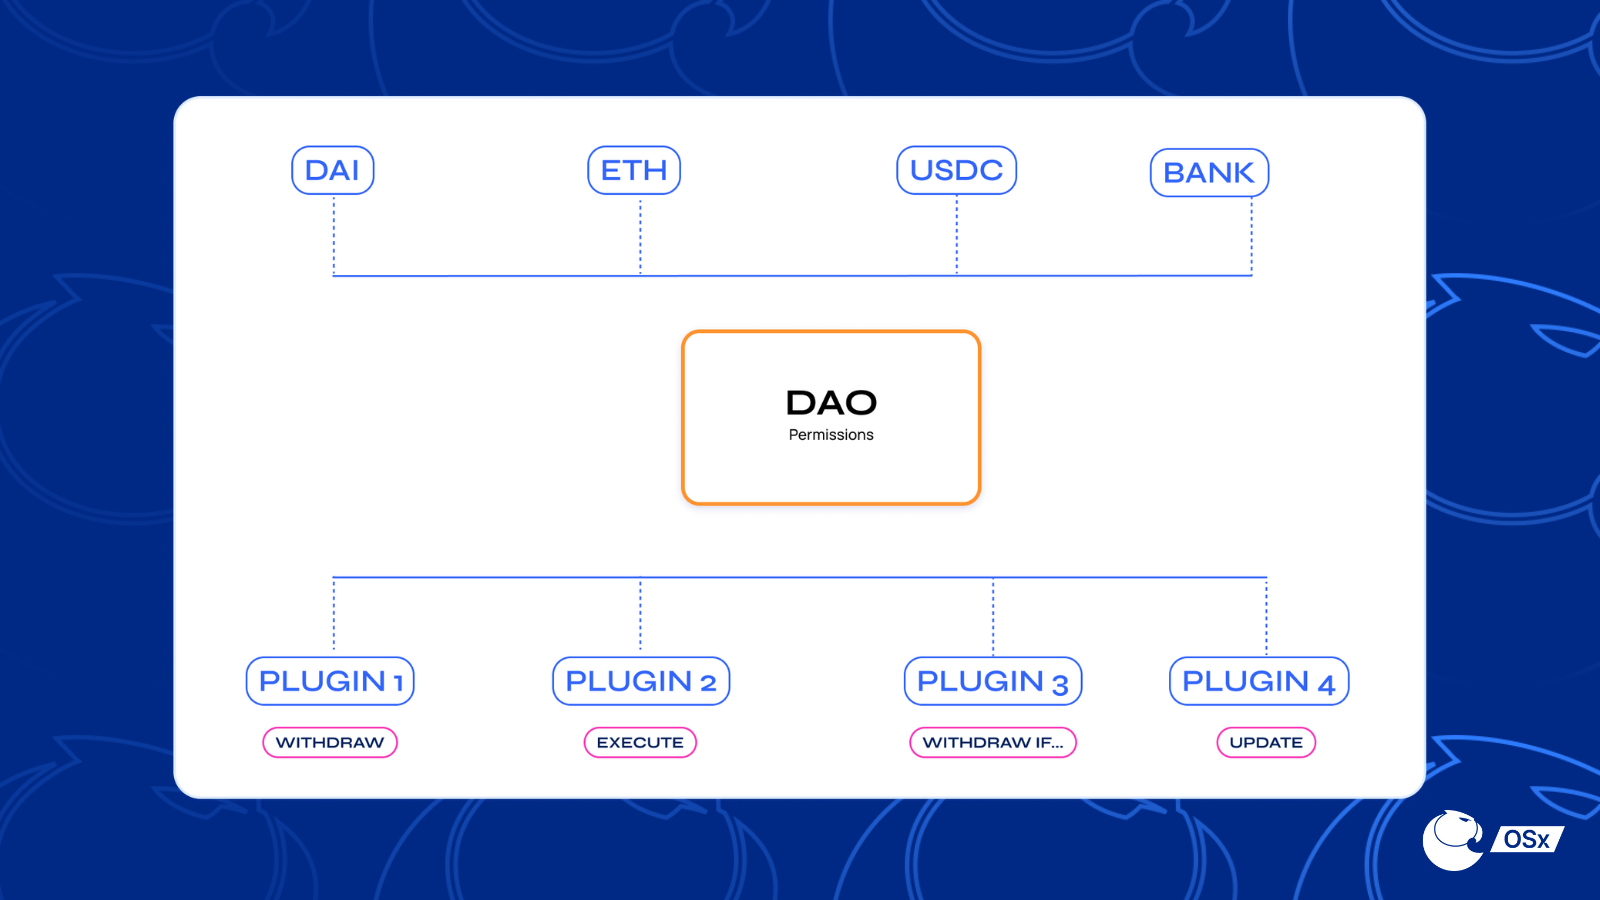 The DAO core is in the middle, and the plugins are at the edges